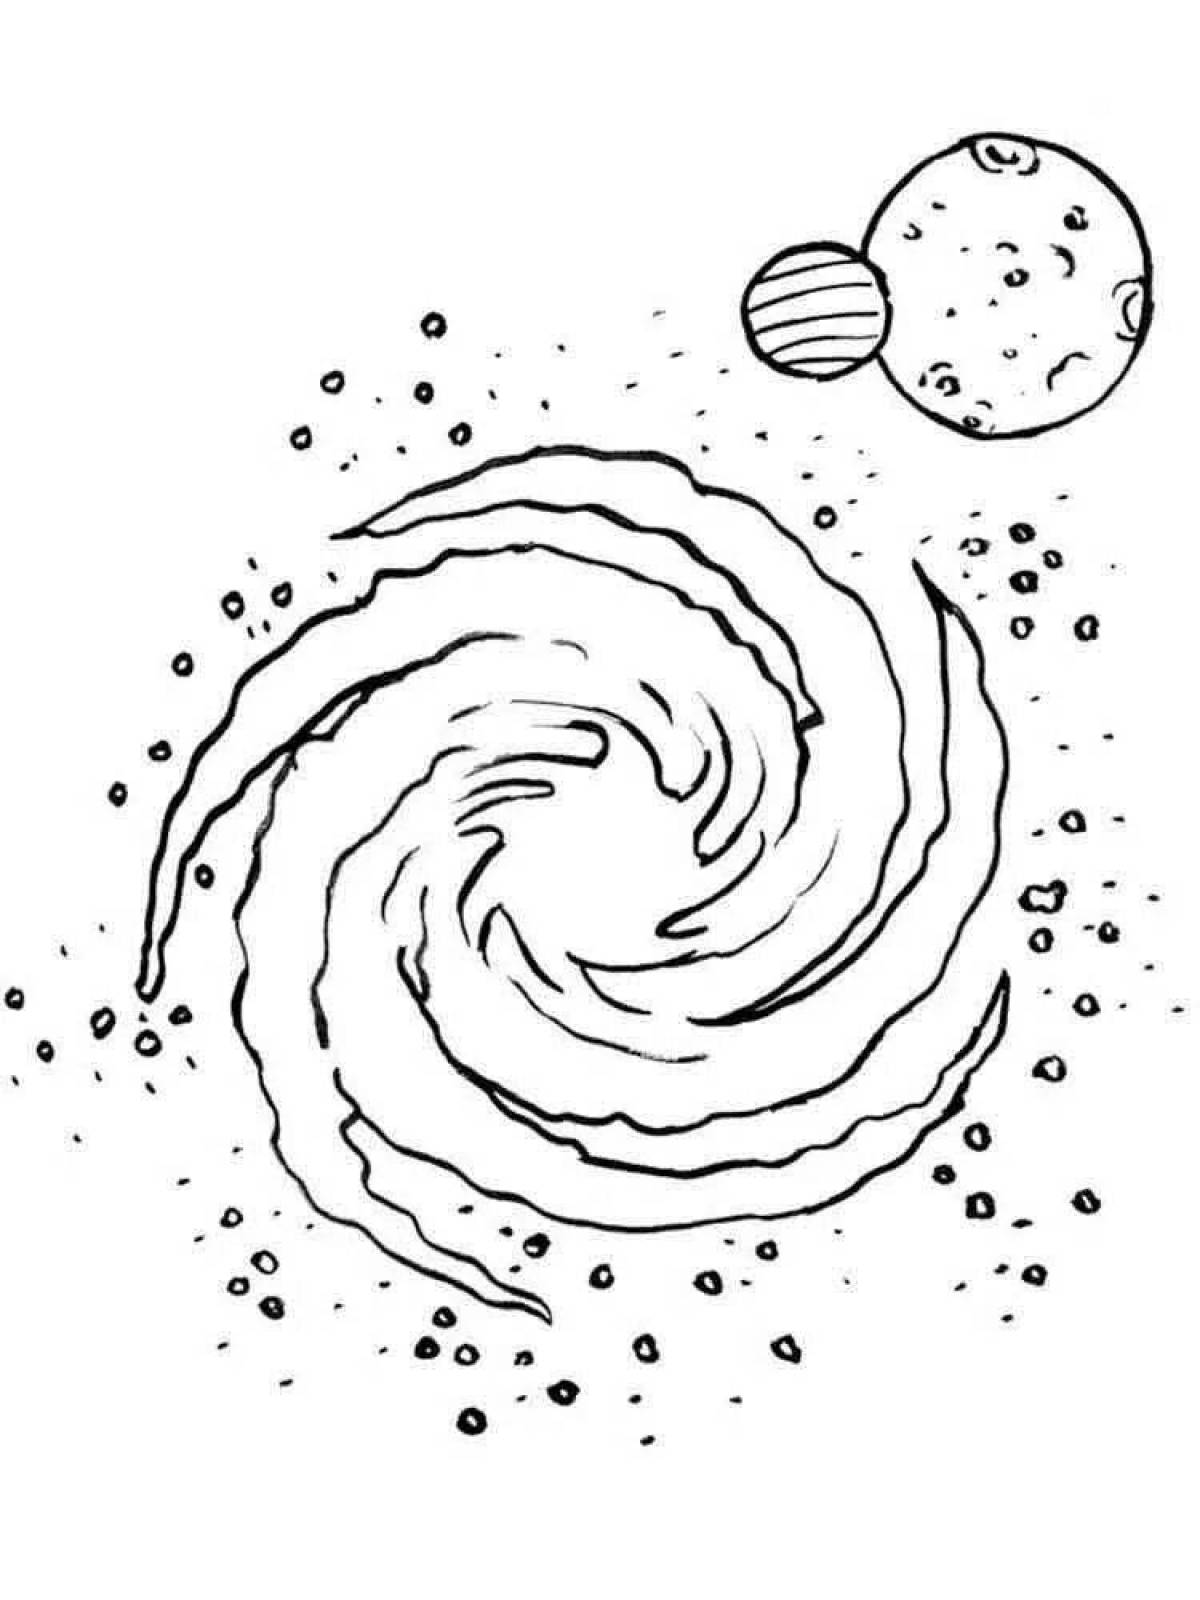 Coloring book exalted black hole